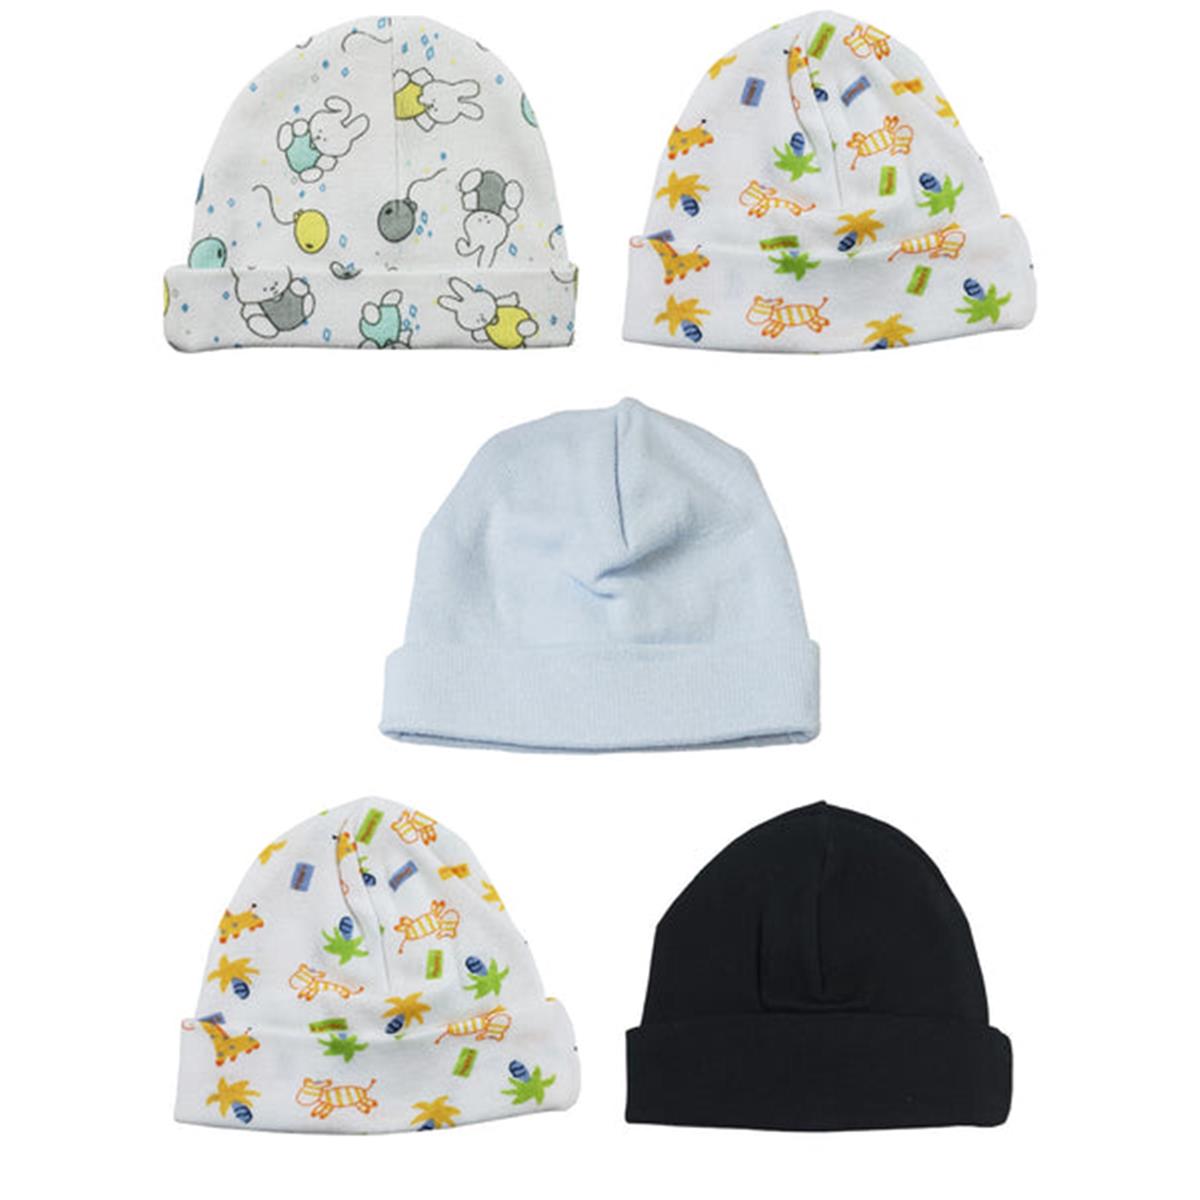 Picture of Bambini LS-0466 Boys Baby Caps - Blue&#44; Black & Print - One Size - 5 per Pack